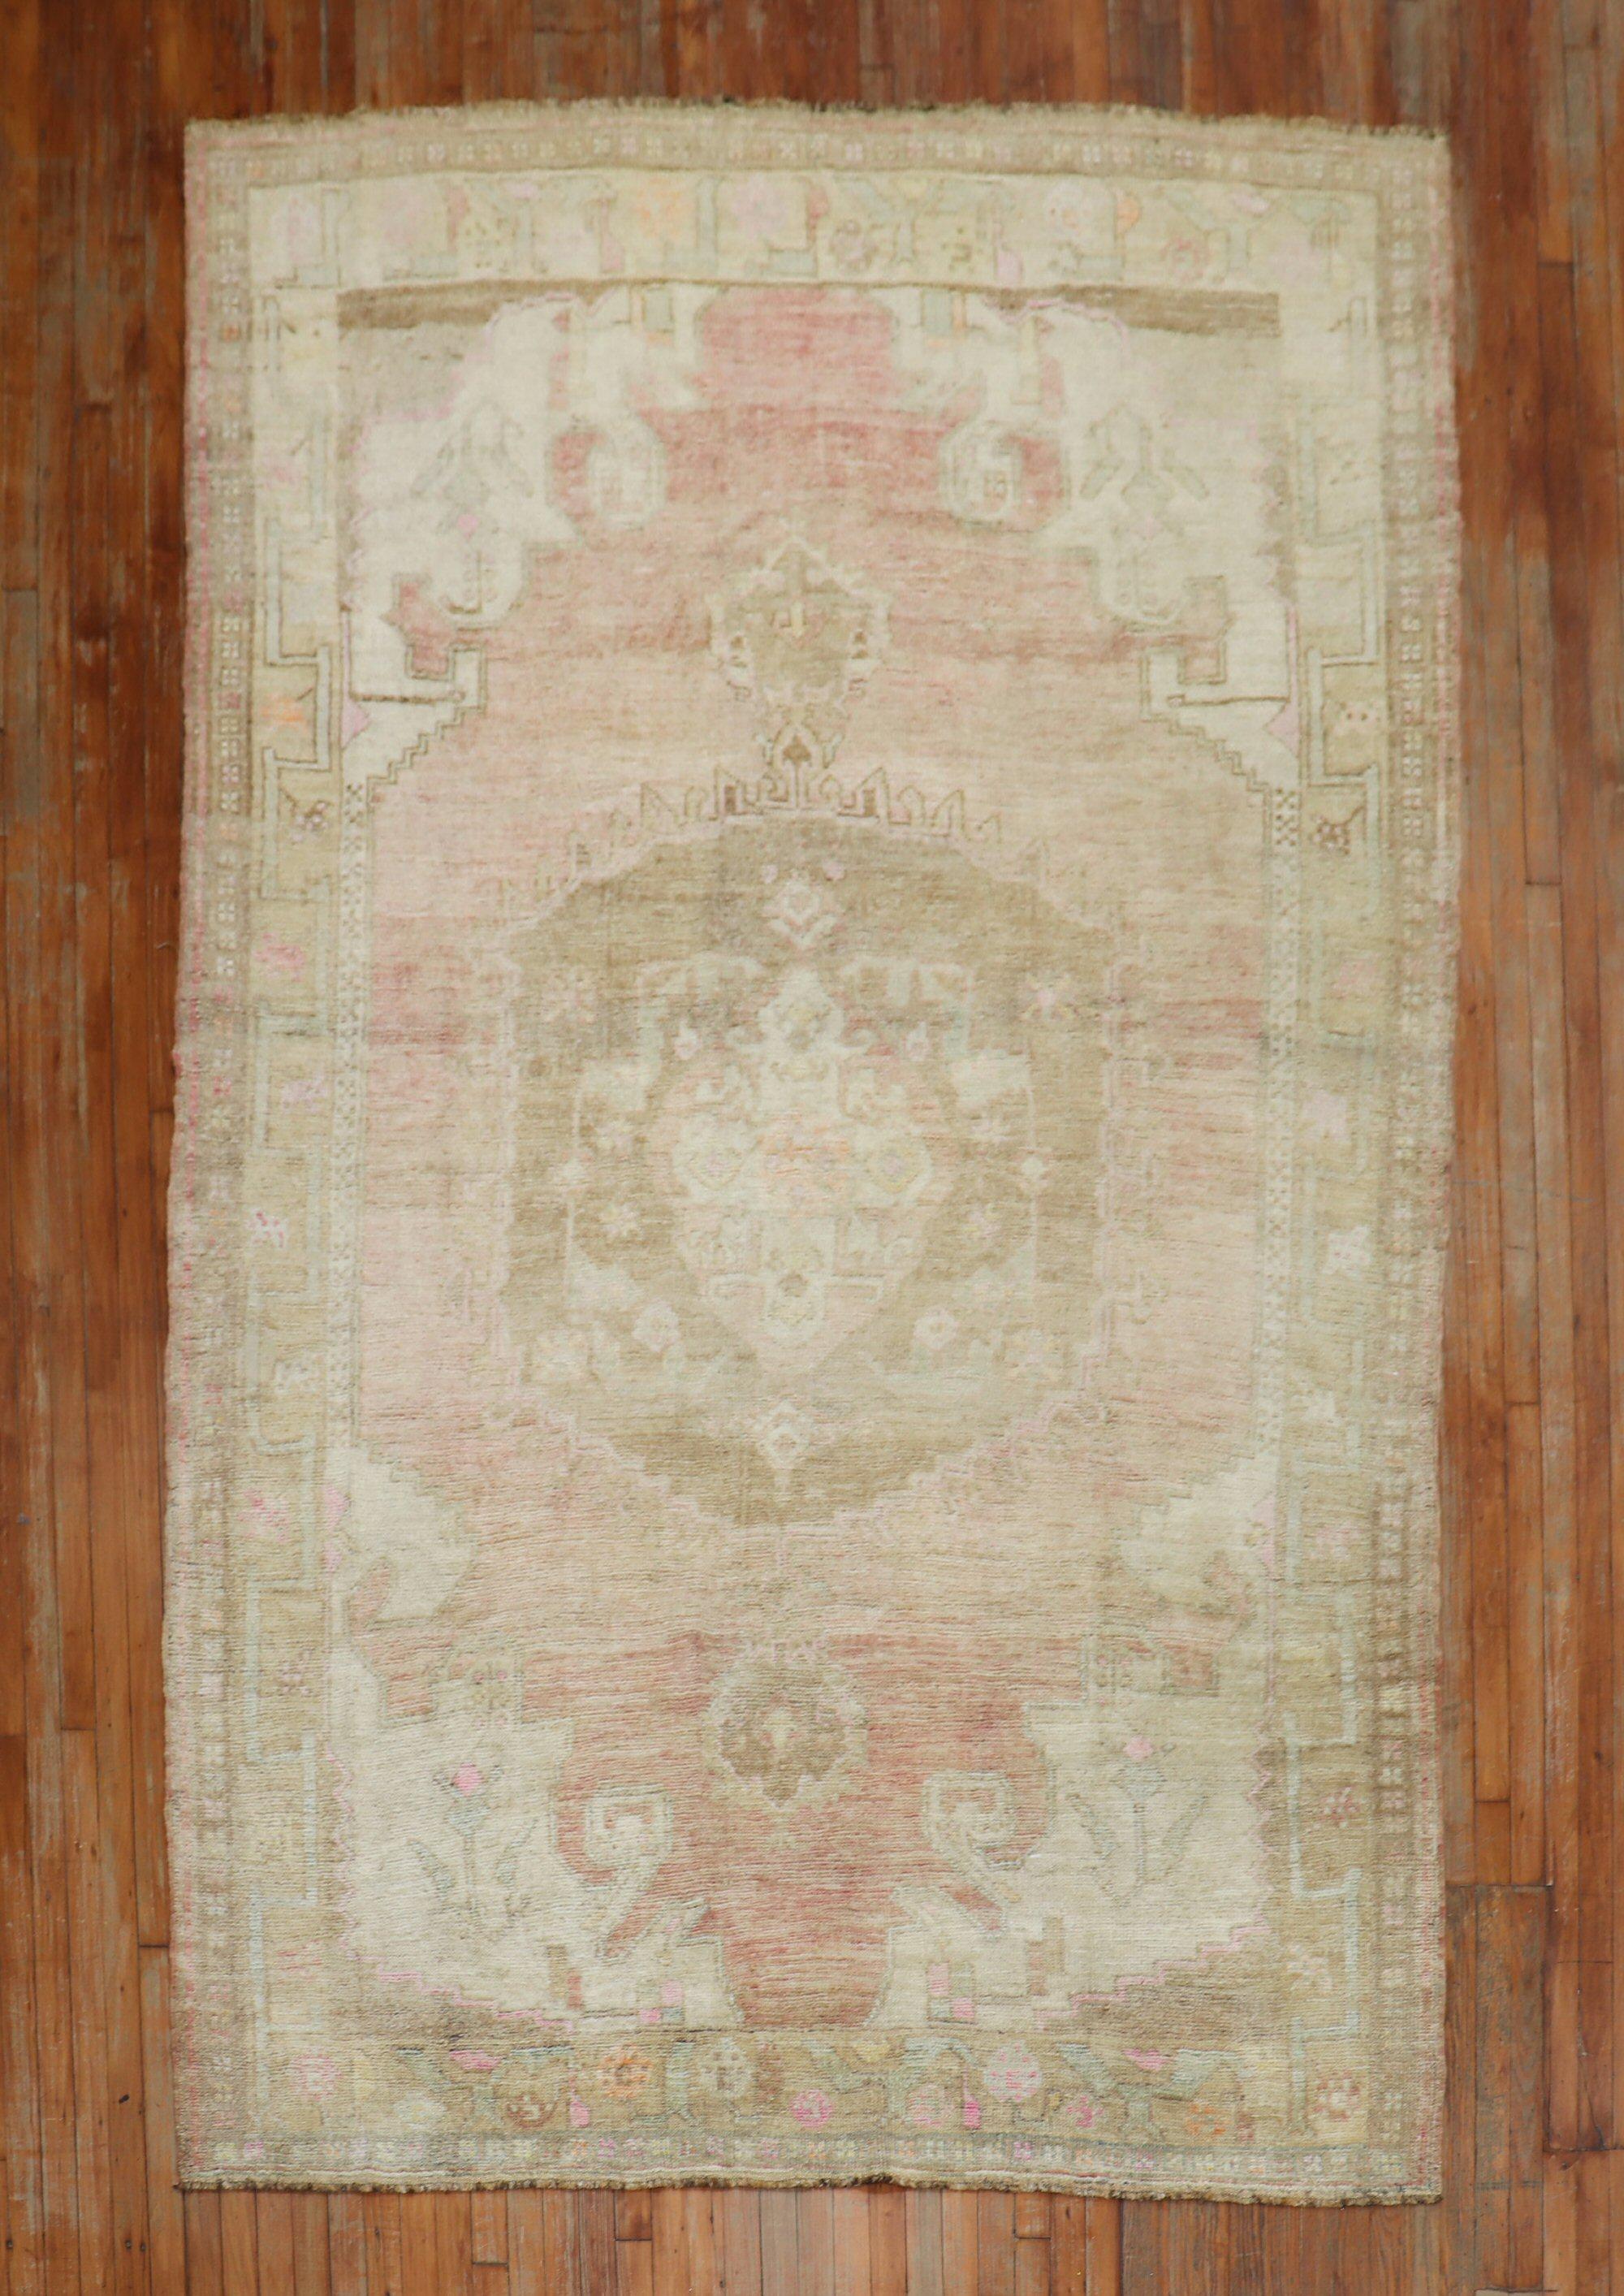 A vintage Turkish rug with a central medallion on a pink field. accents in white and brown

Measures: 6'8'' x 10'8''.